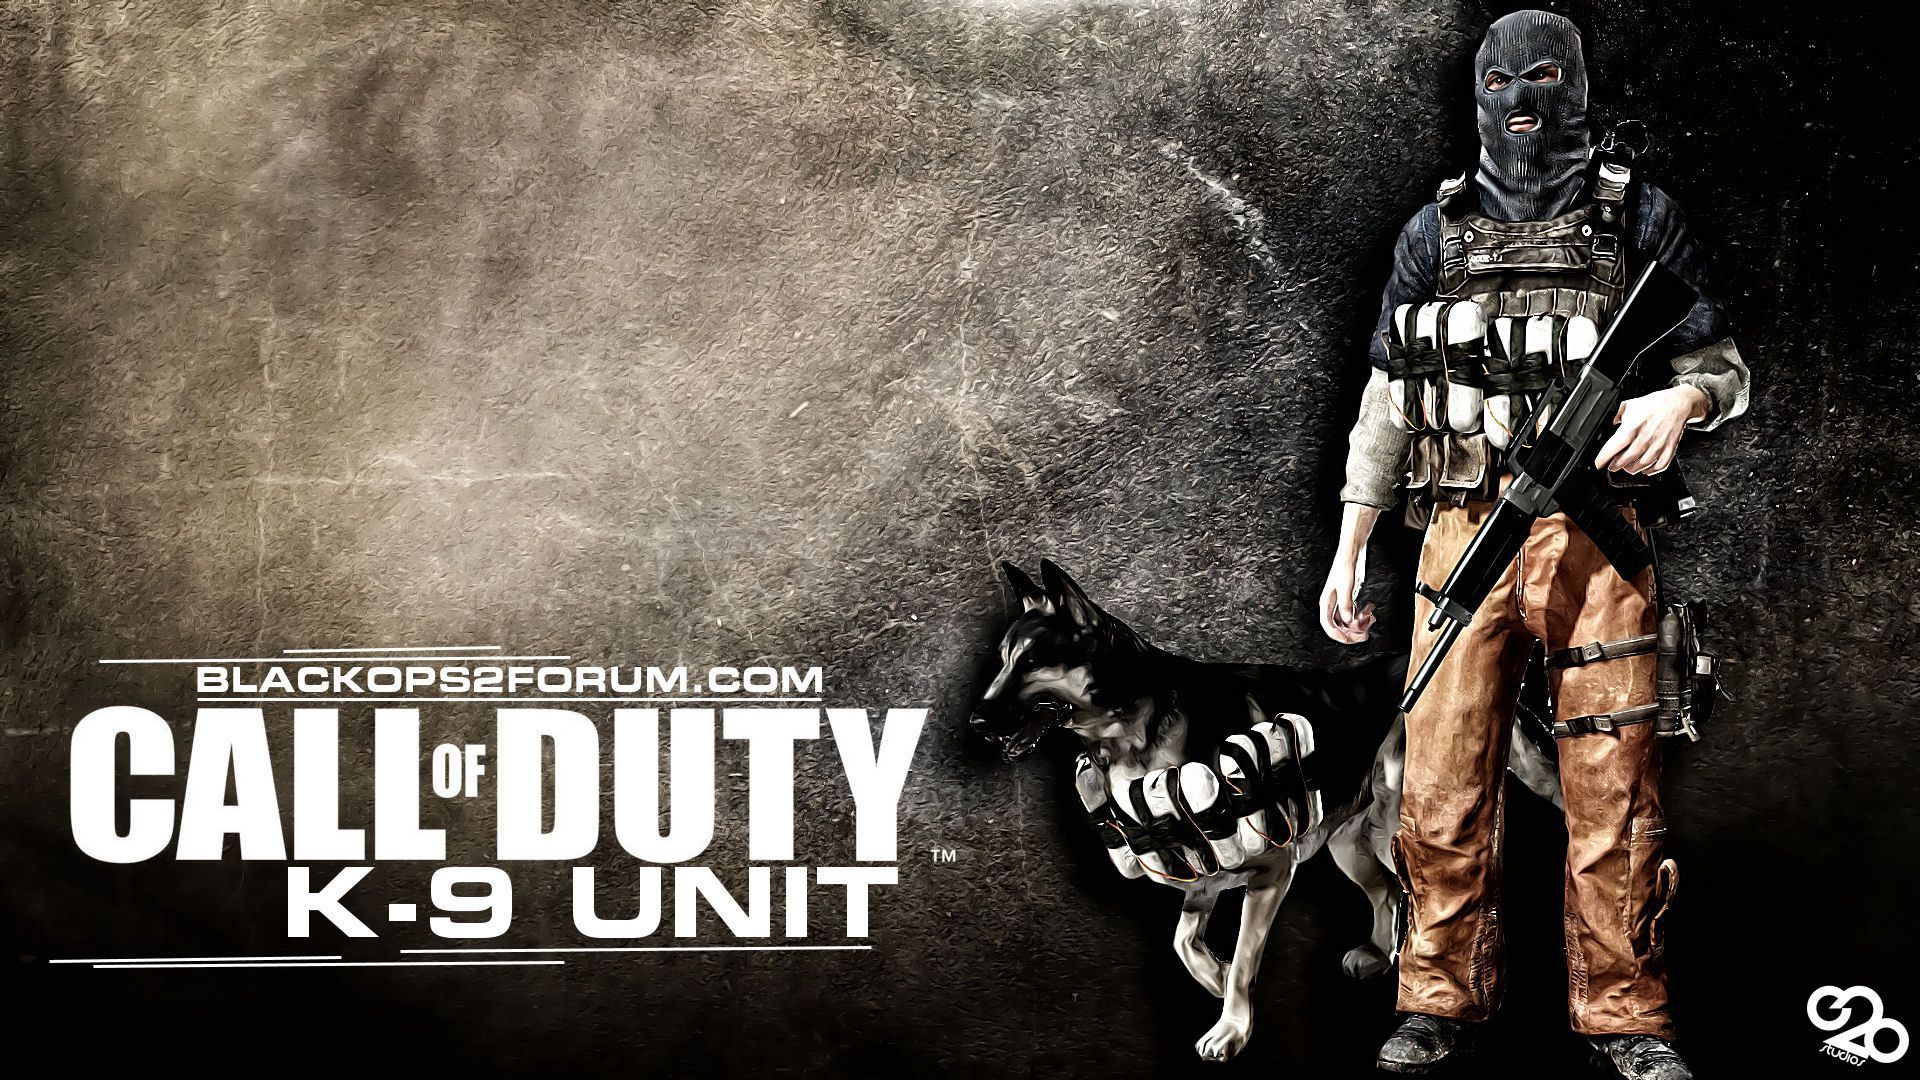 K 9 Unit Wallpaper. The Unofficial Call Of Duty Forums